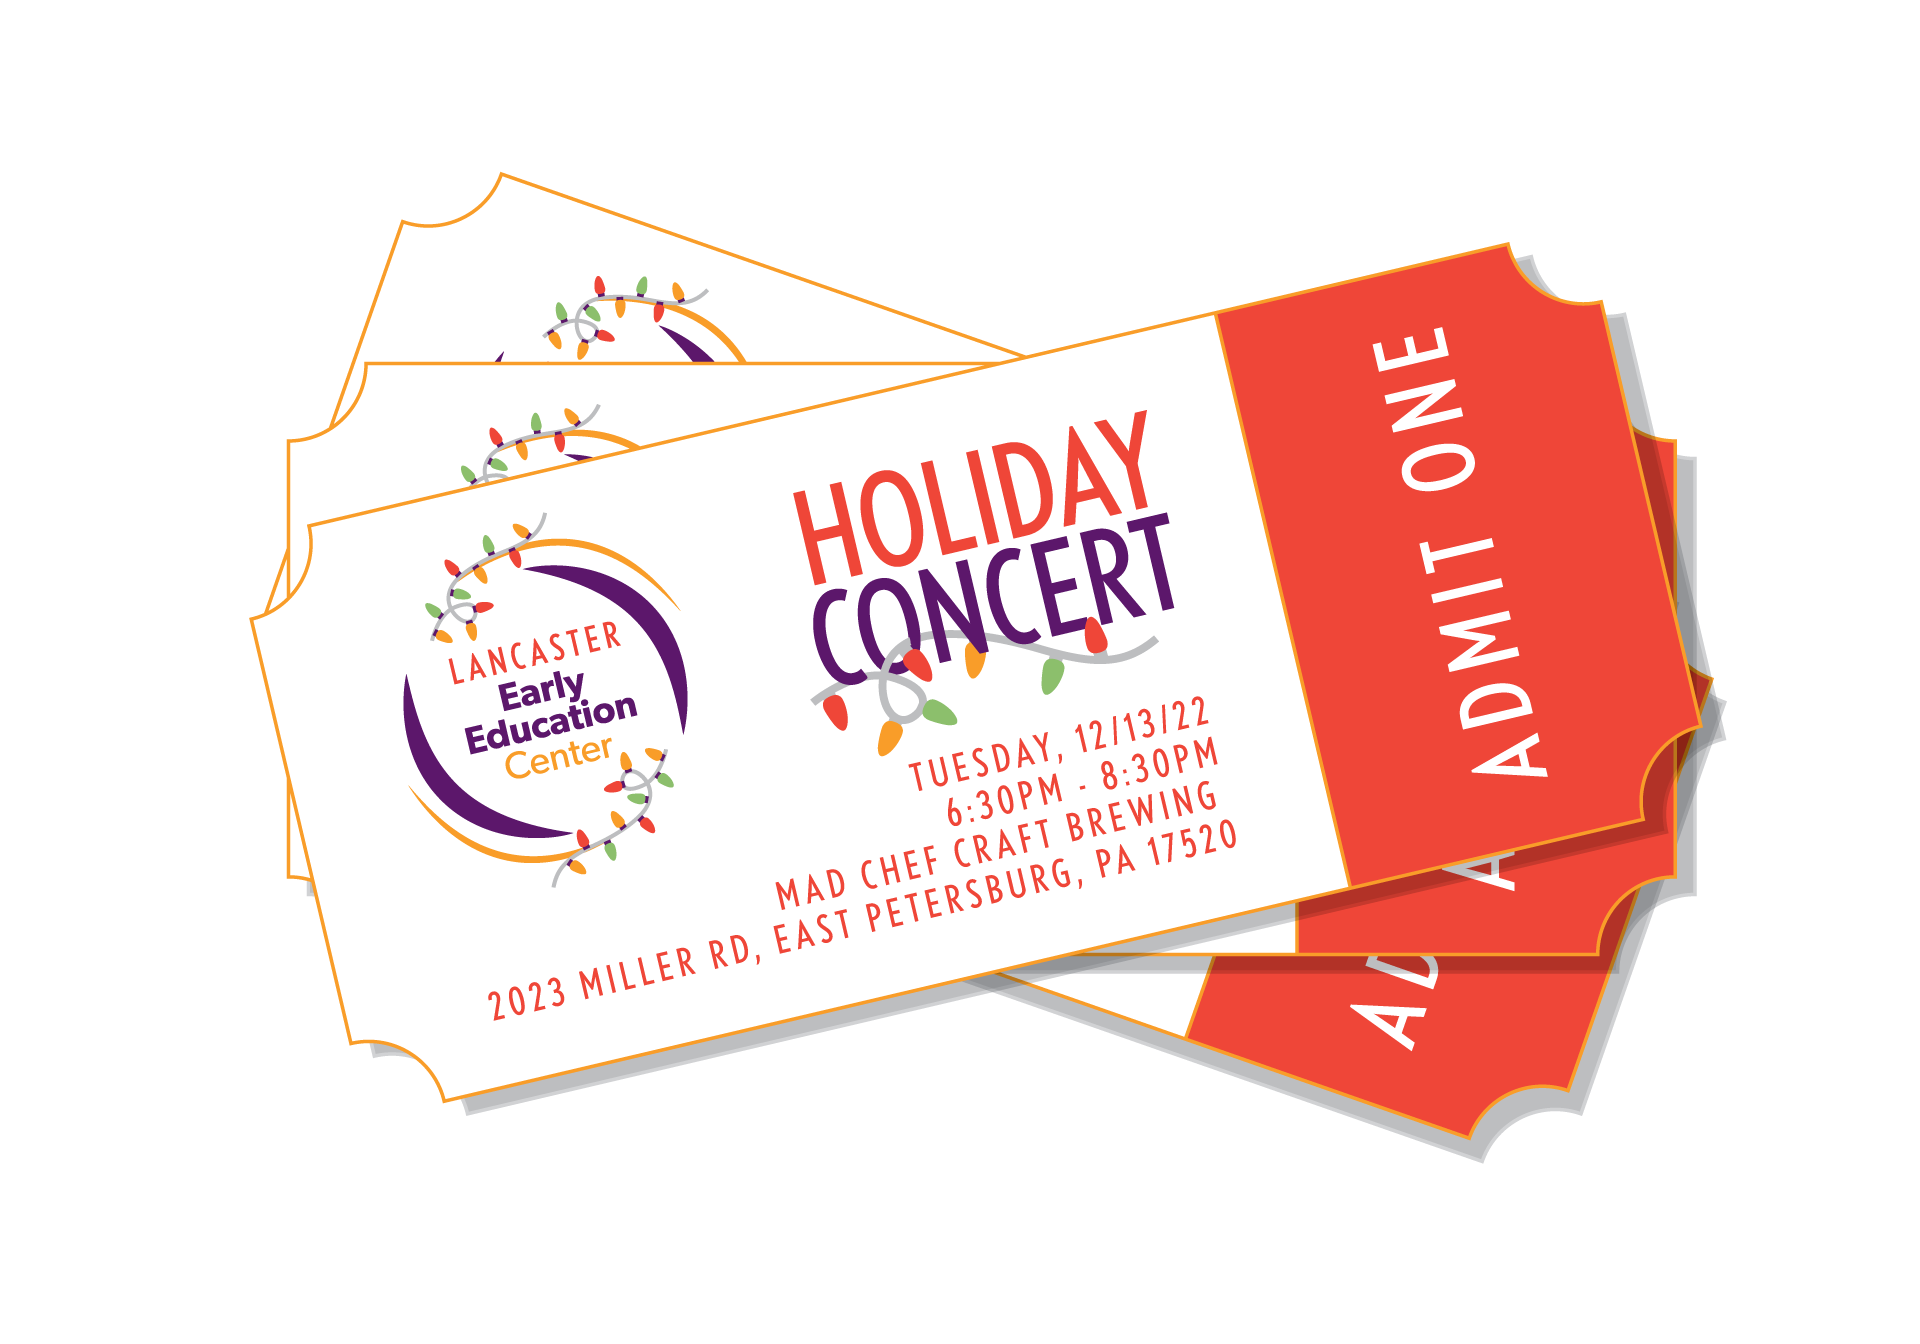 Holiday Concert to Support Lancaster Early Education Center formerly Lancaster Day Care Center Quality early care & education since 1915.